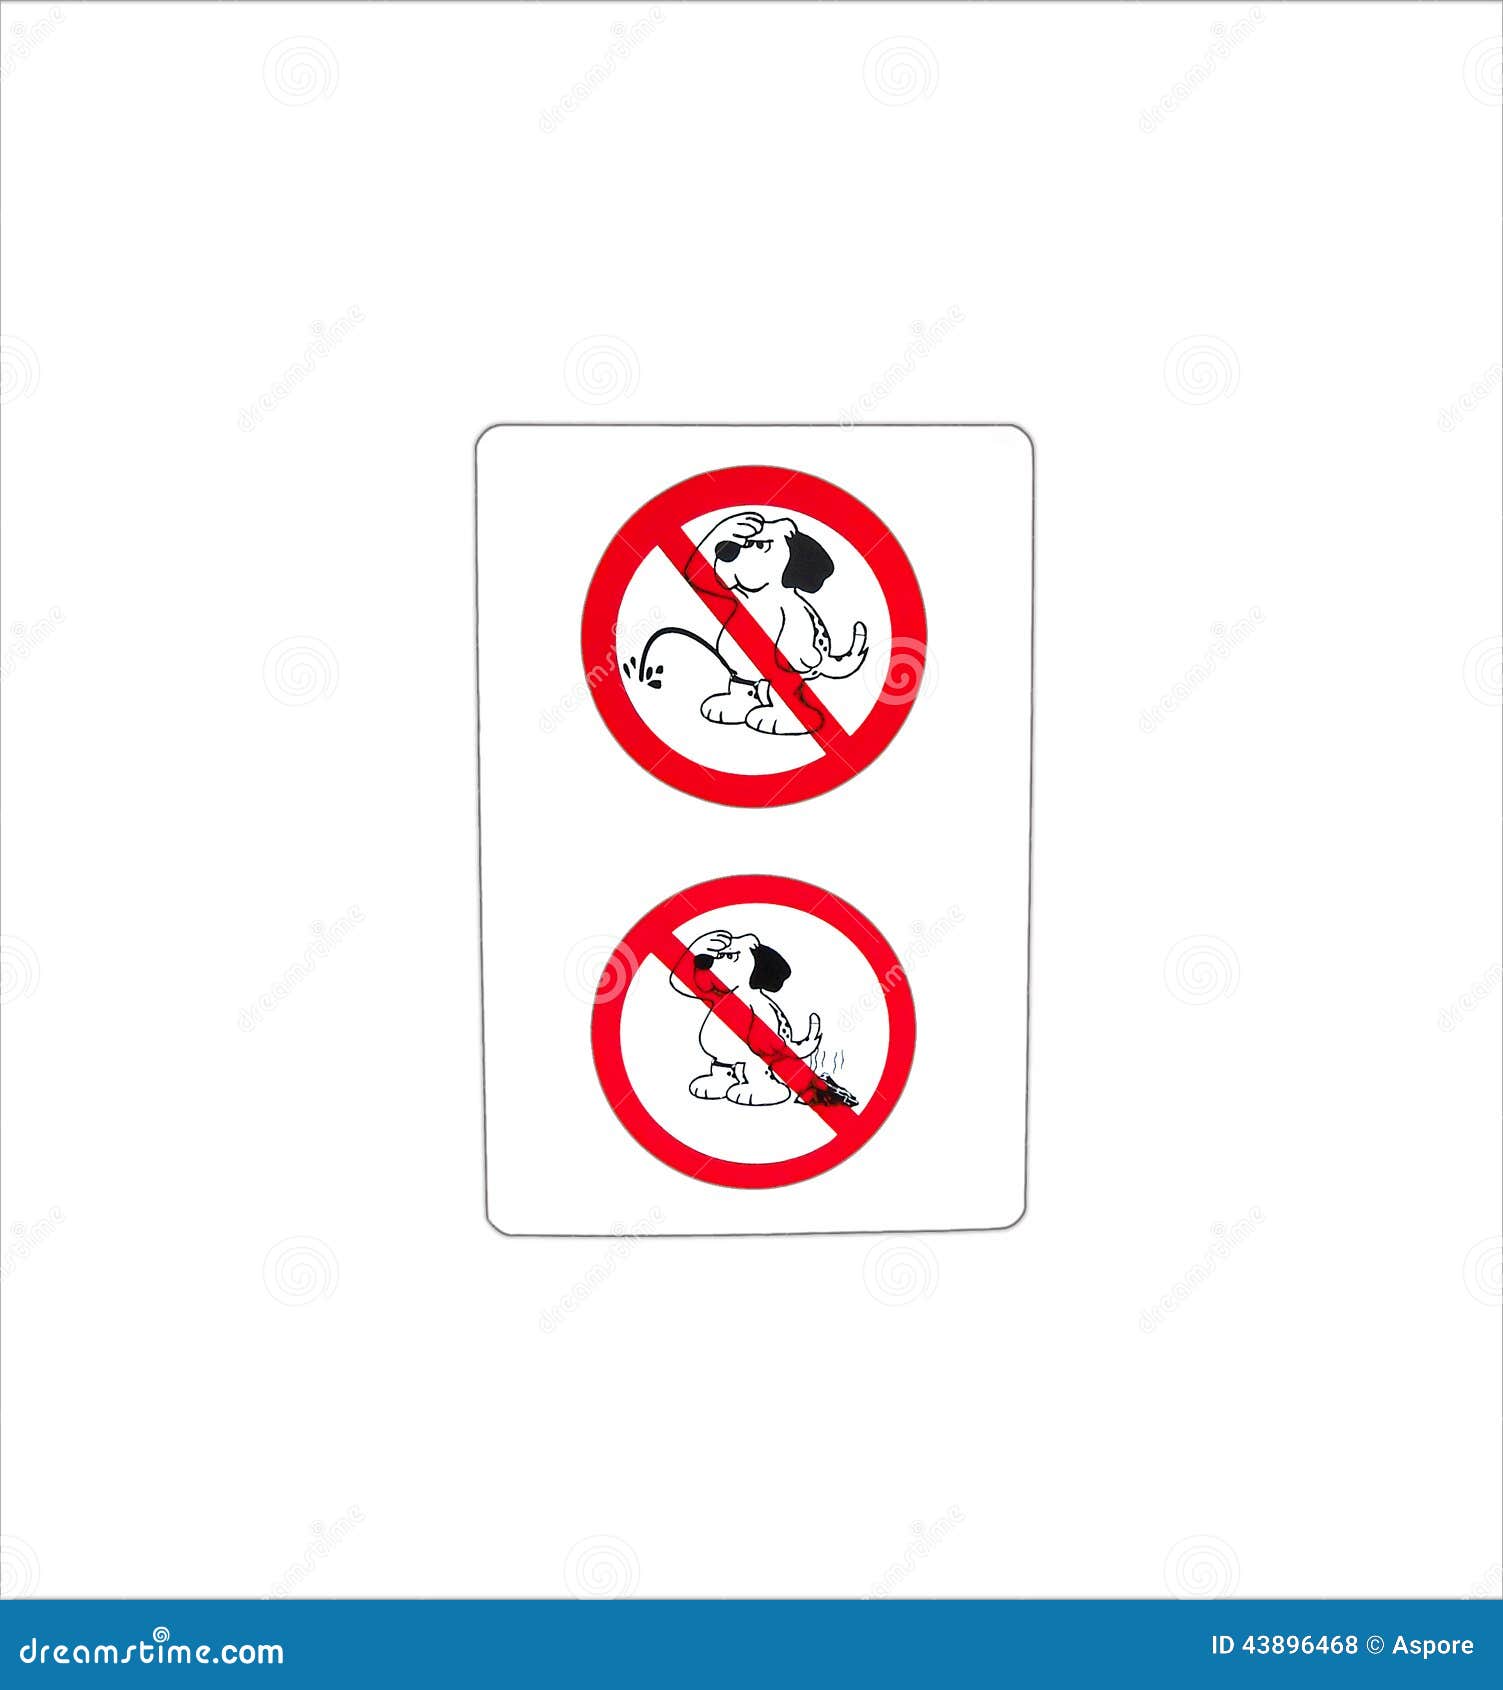  prohibit sign for dog toilet wc